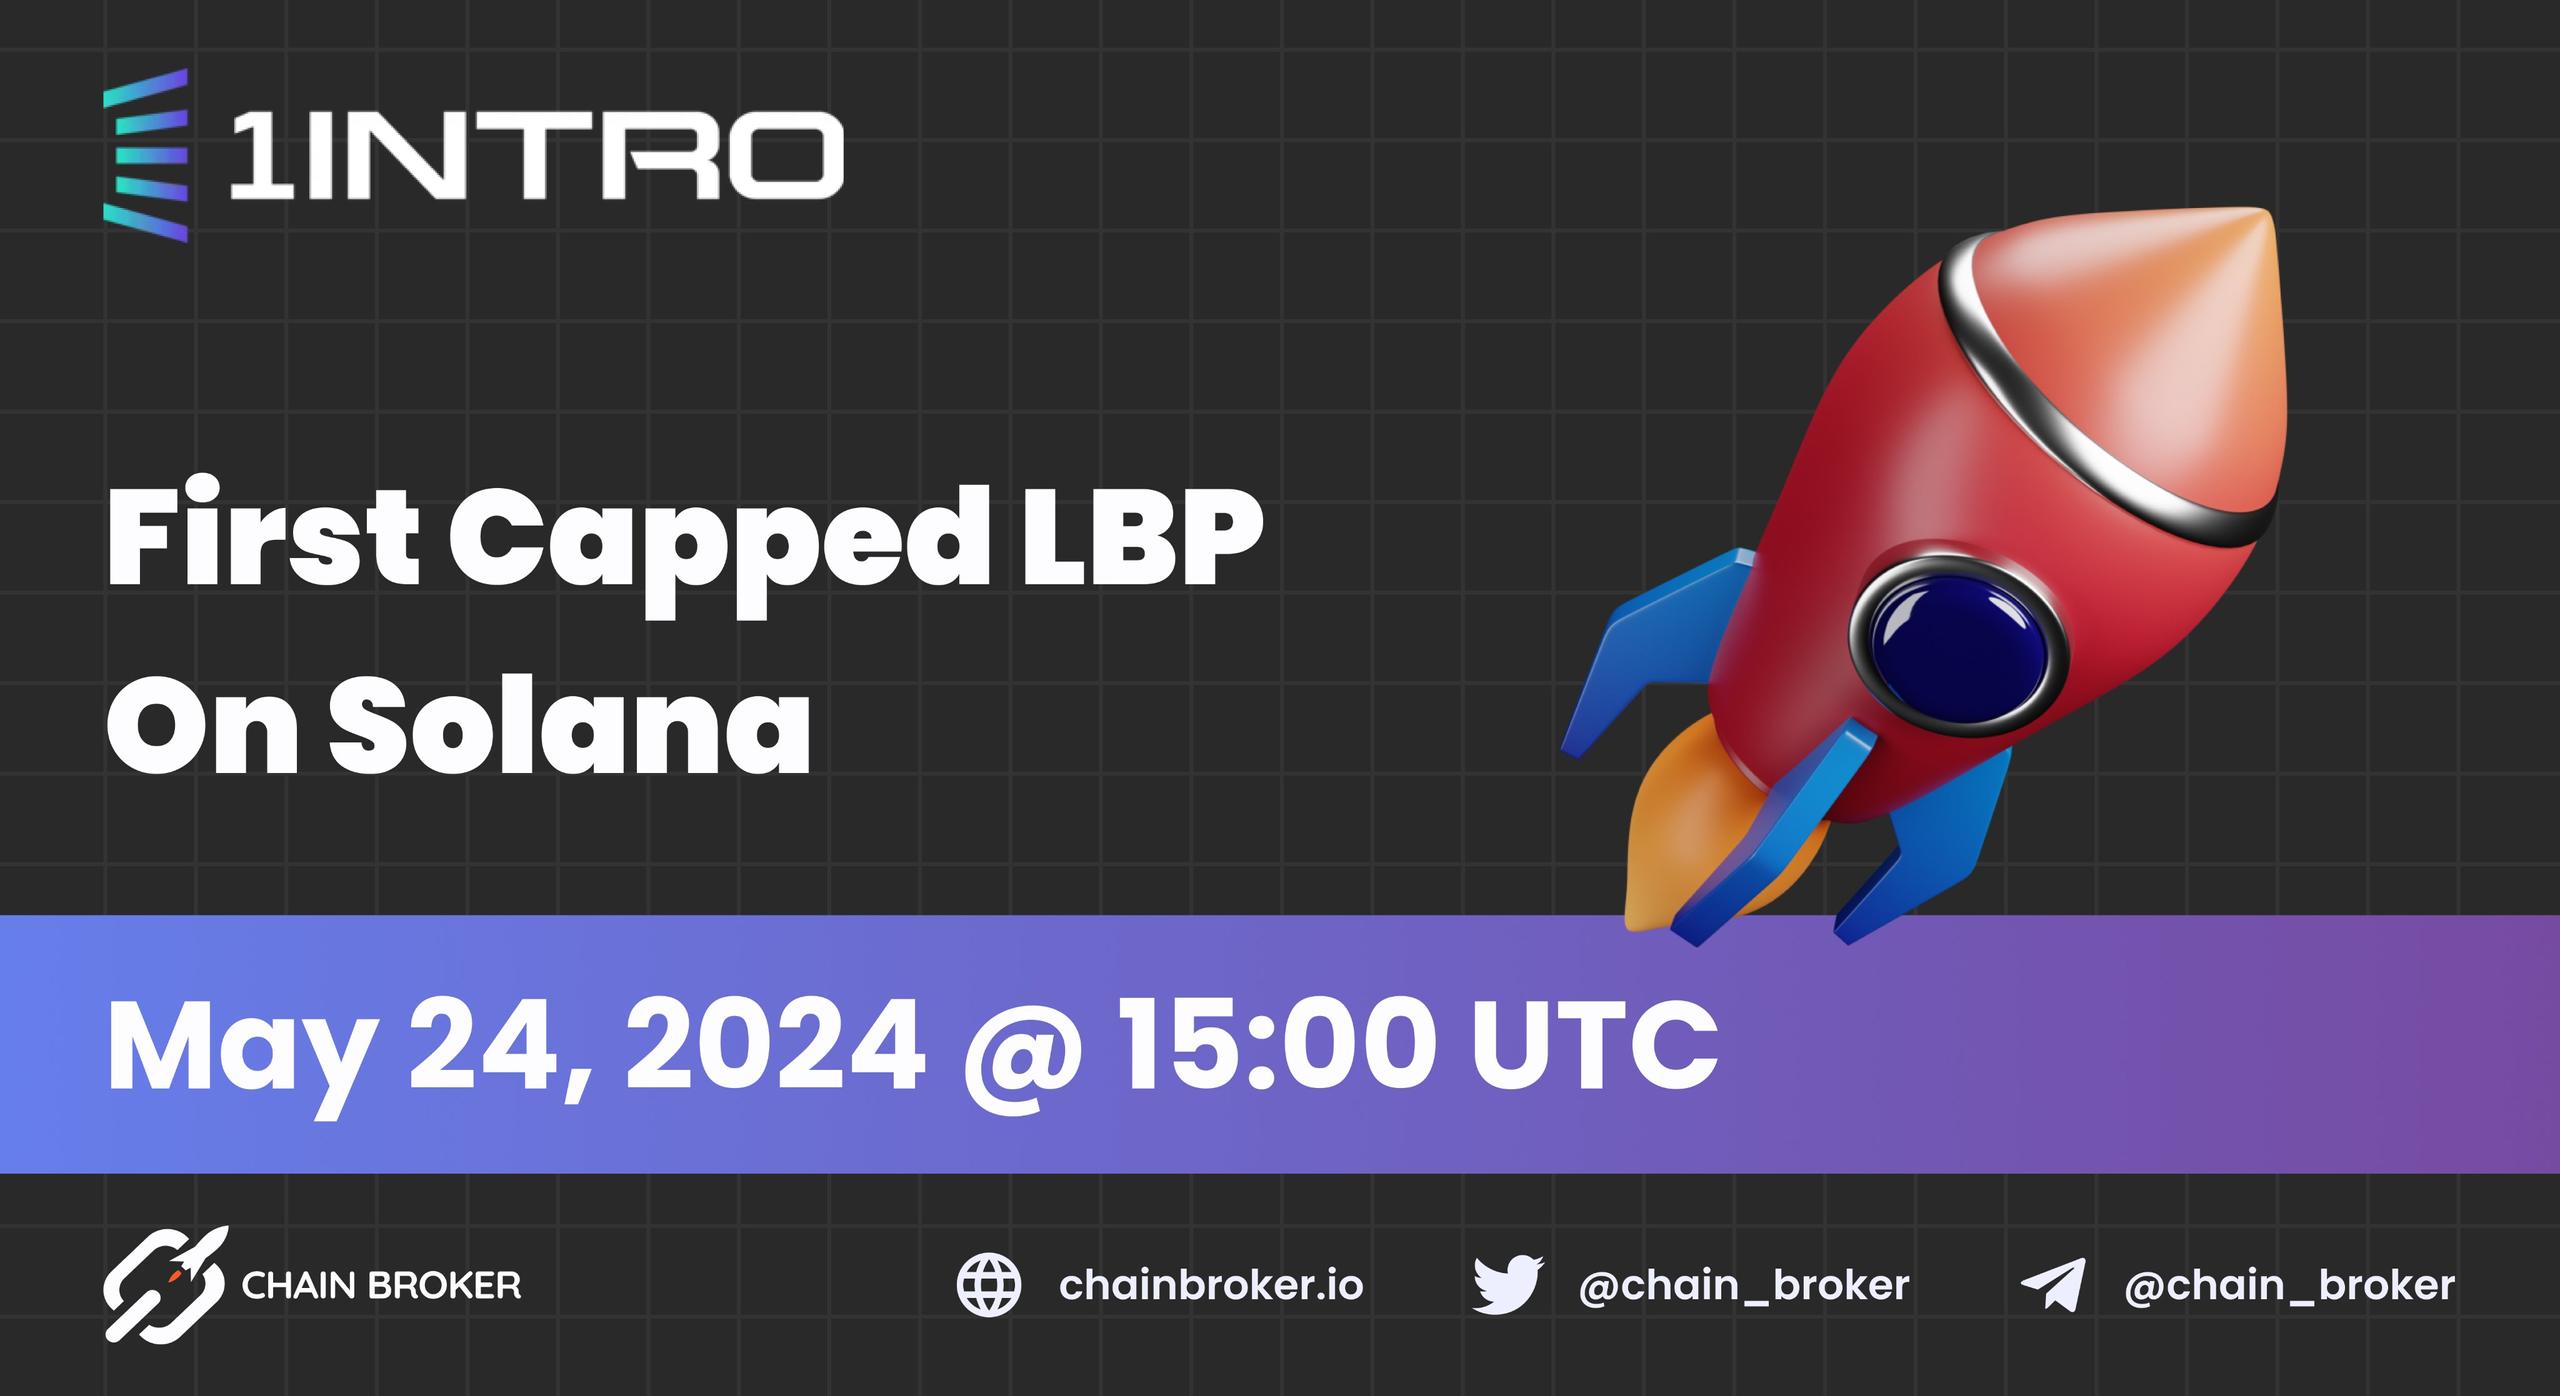 1intro Announces First-Ever Capped LBP on Solana